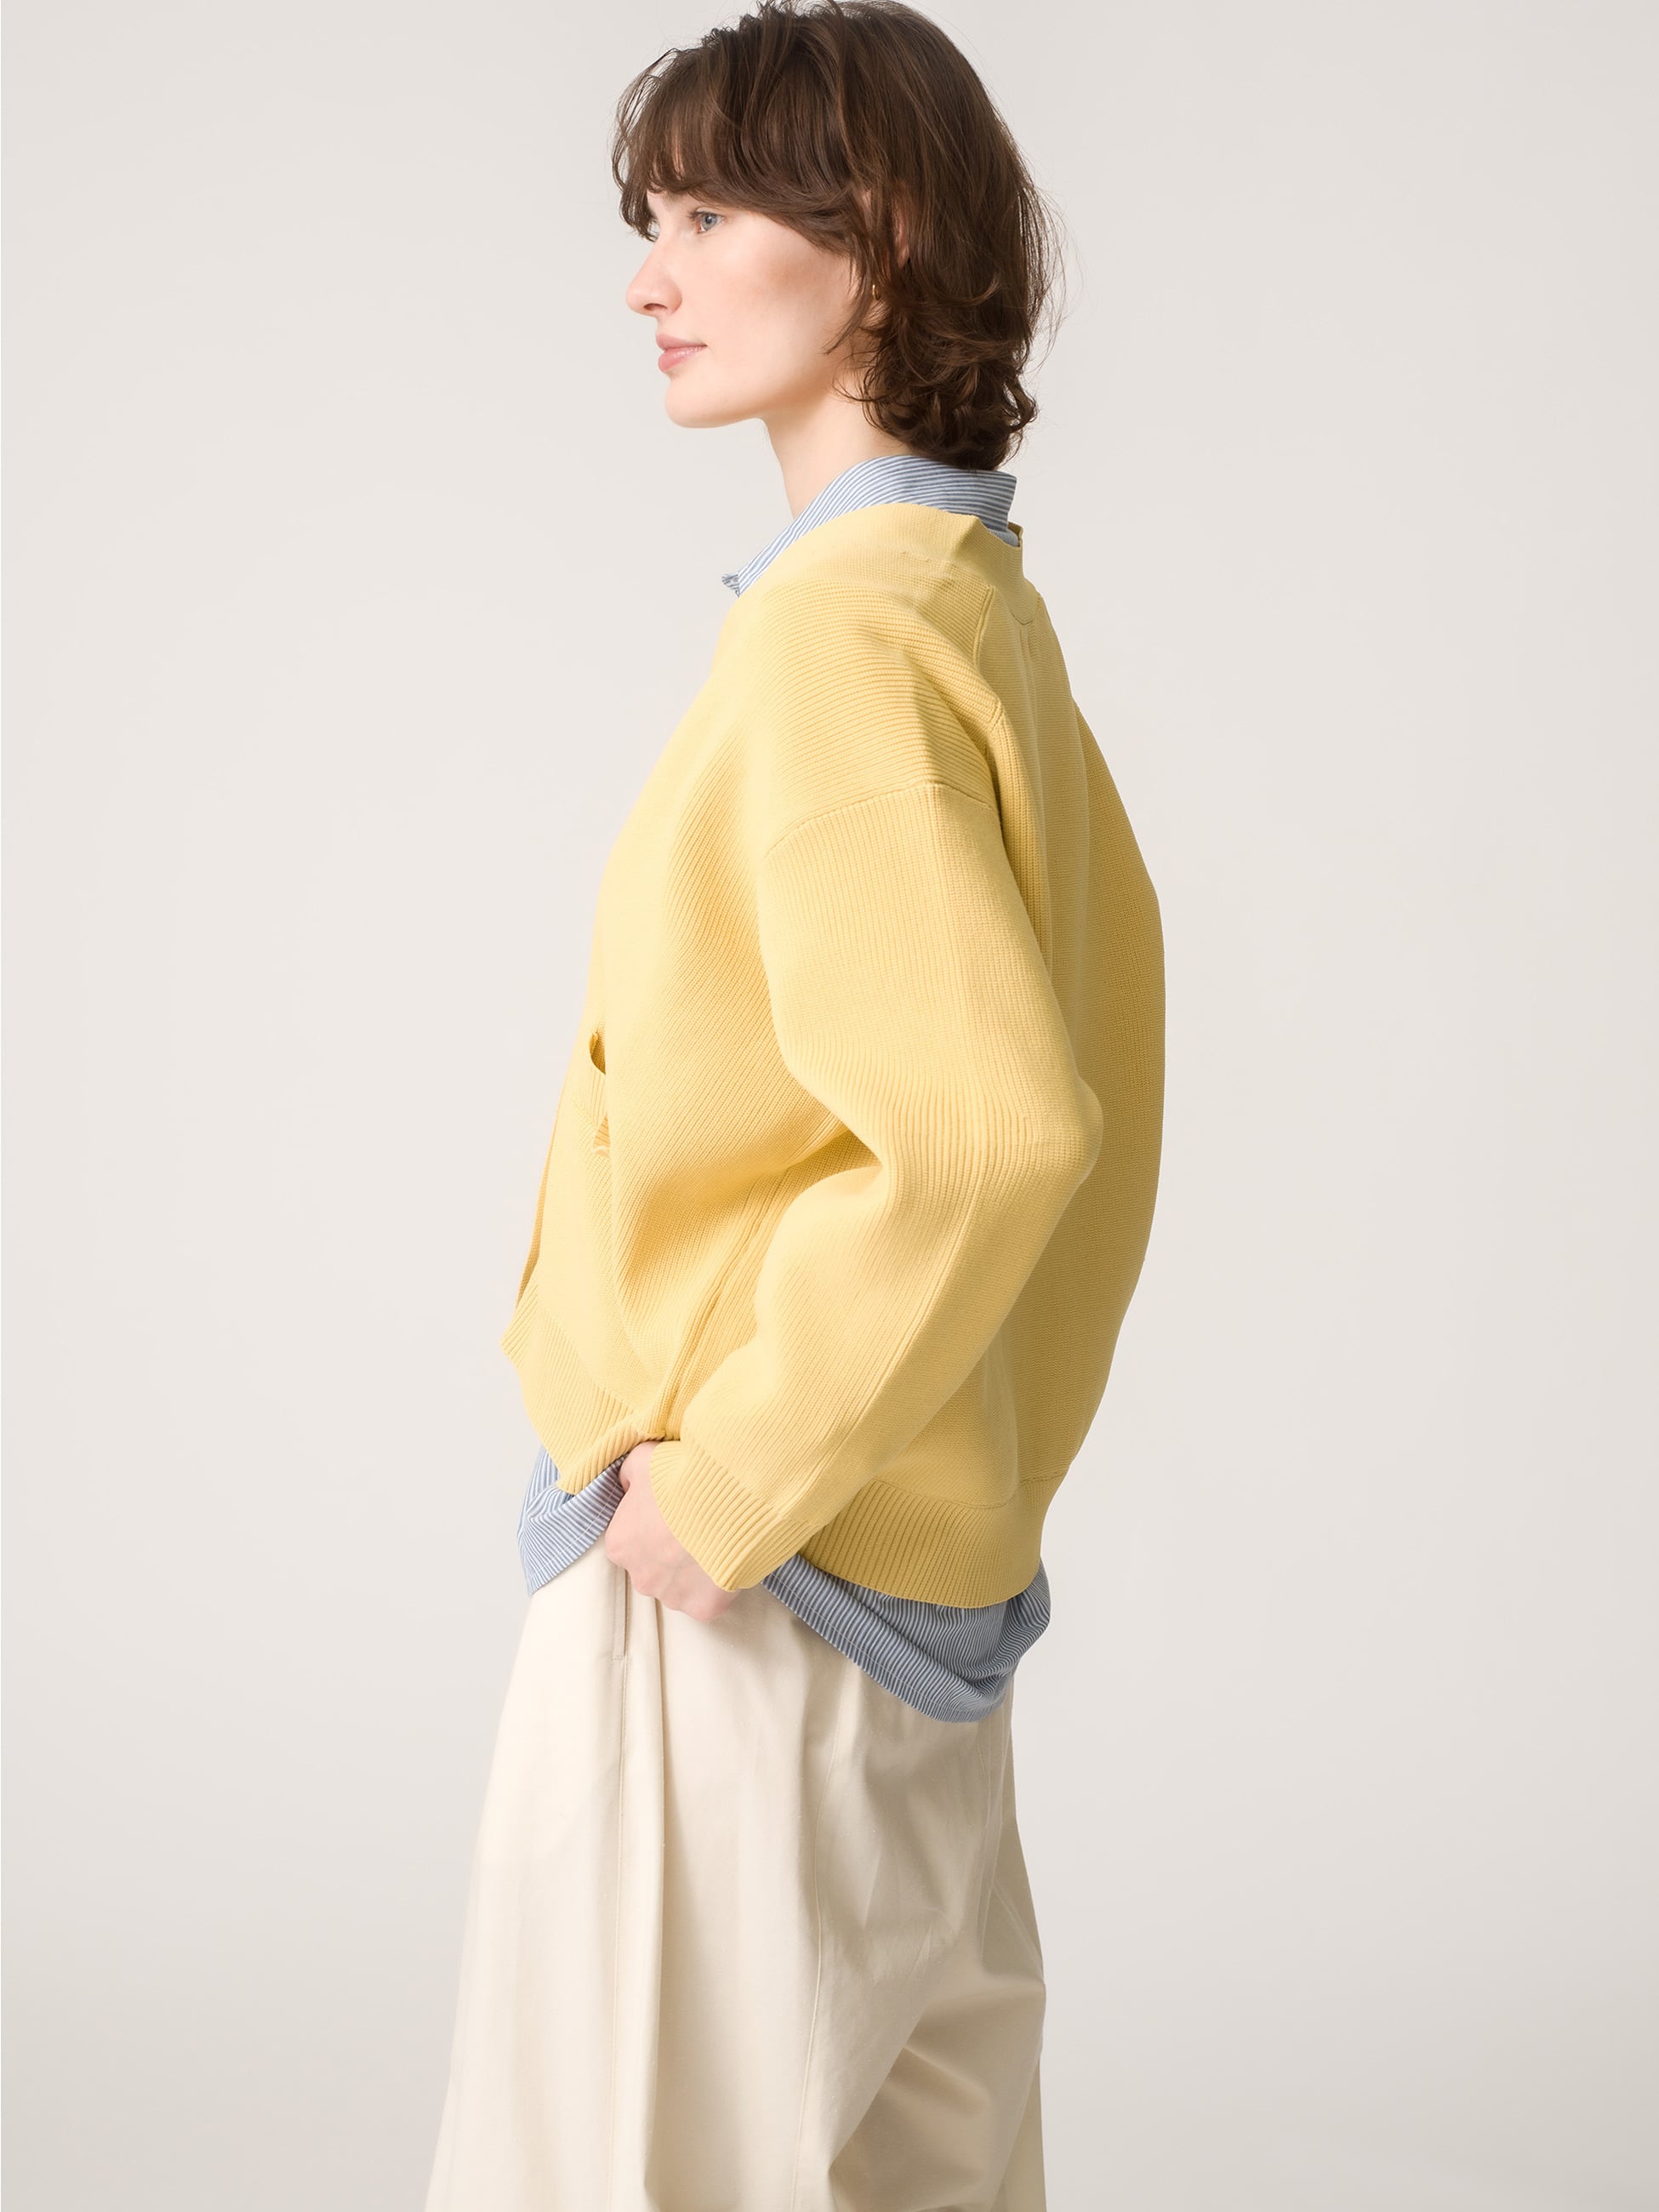 Recycle Polyester Cardigan 詳細画像 yellow 2